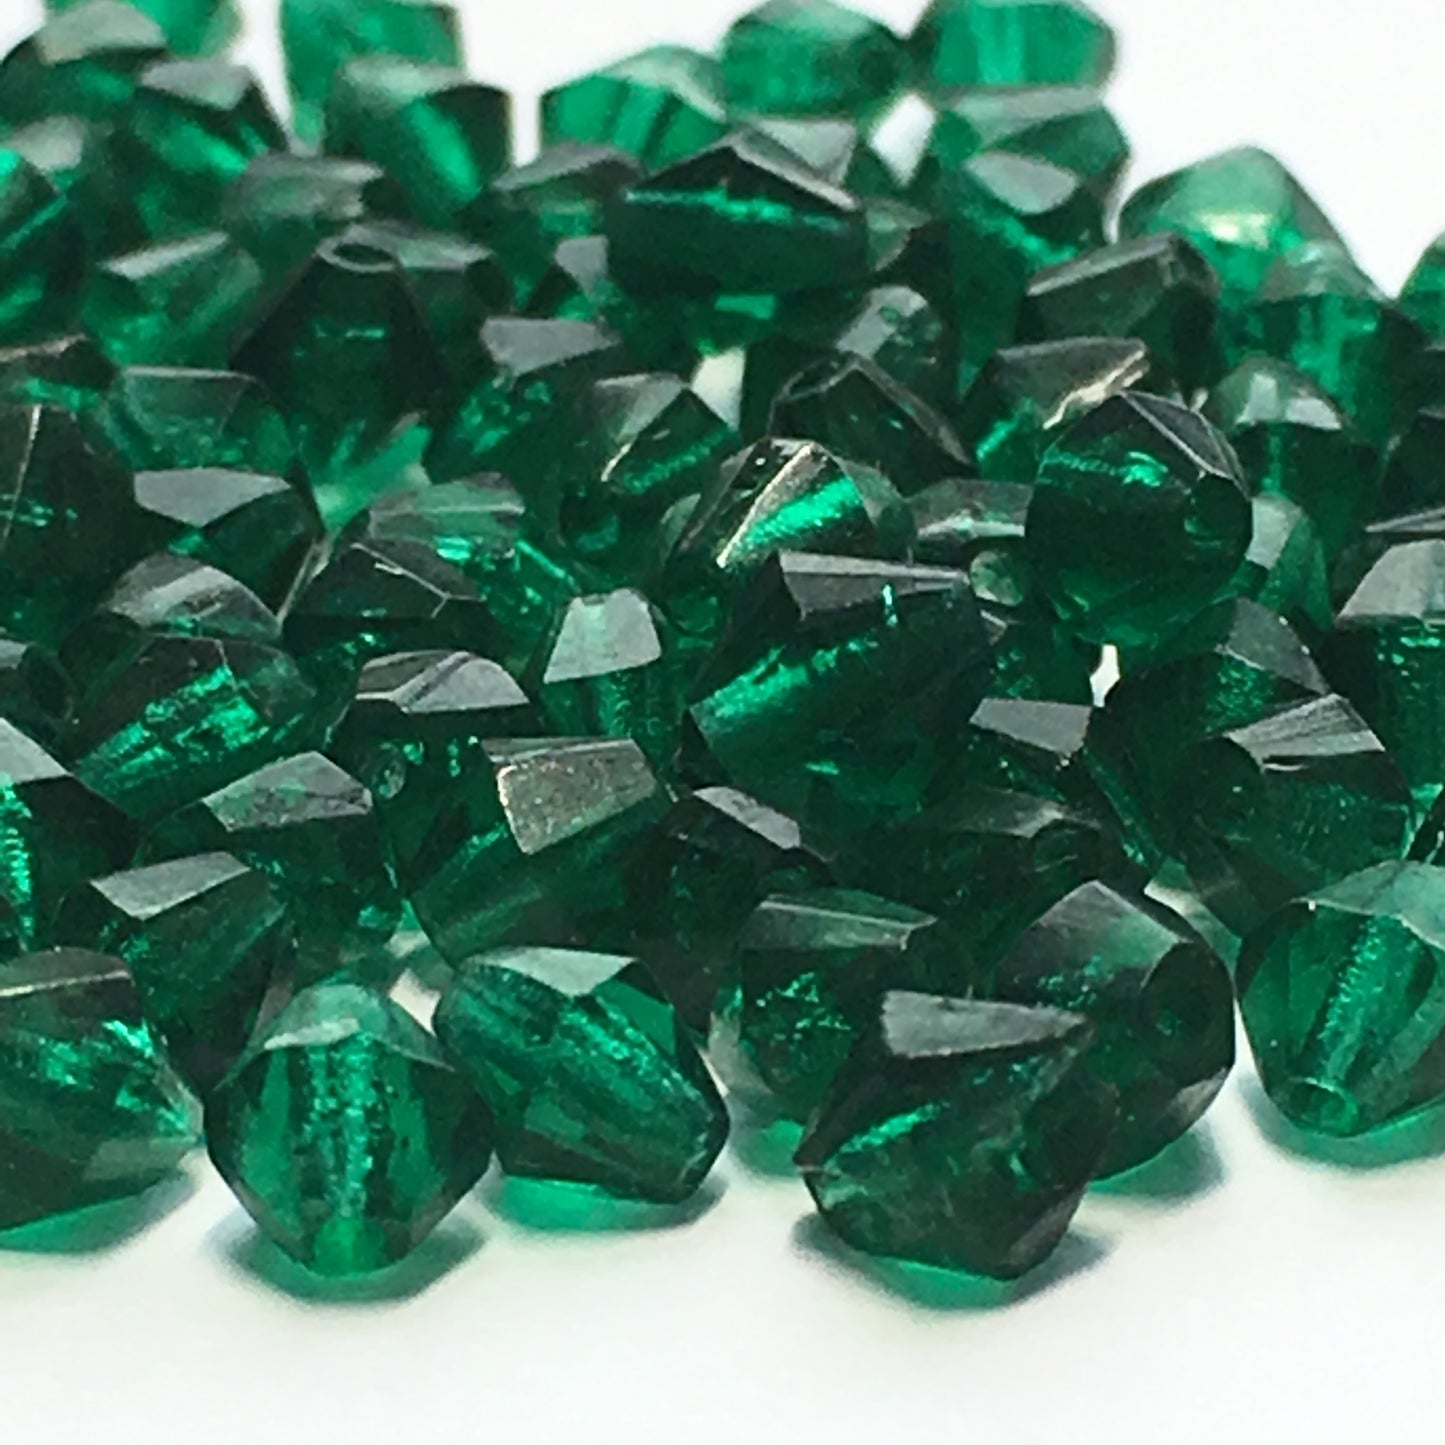 Transparent Green Glass Bicone Beads, 4 mm, 50 Beads